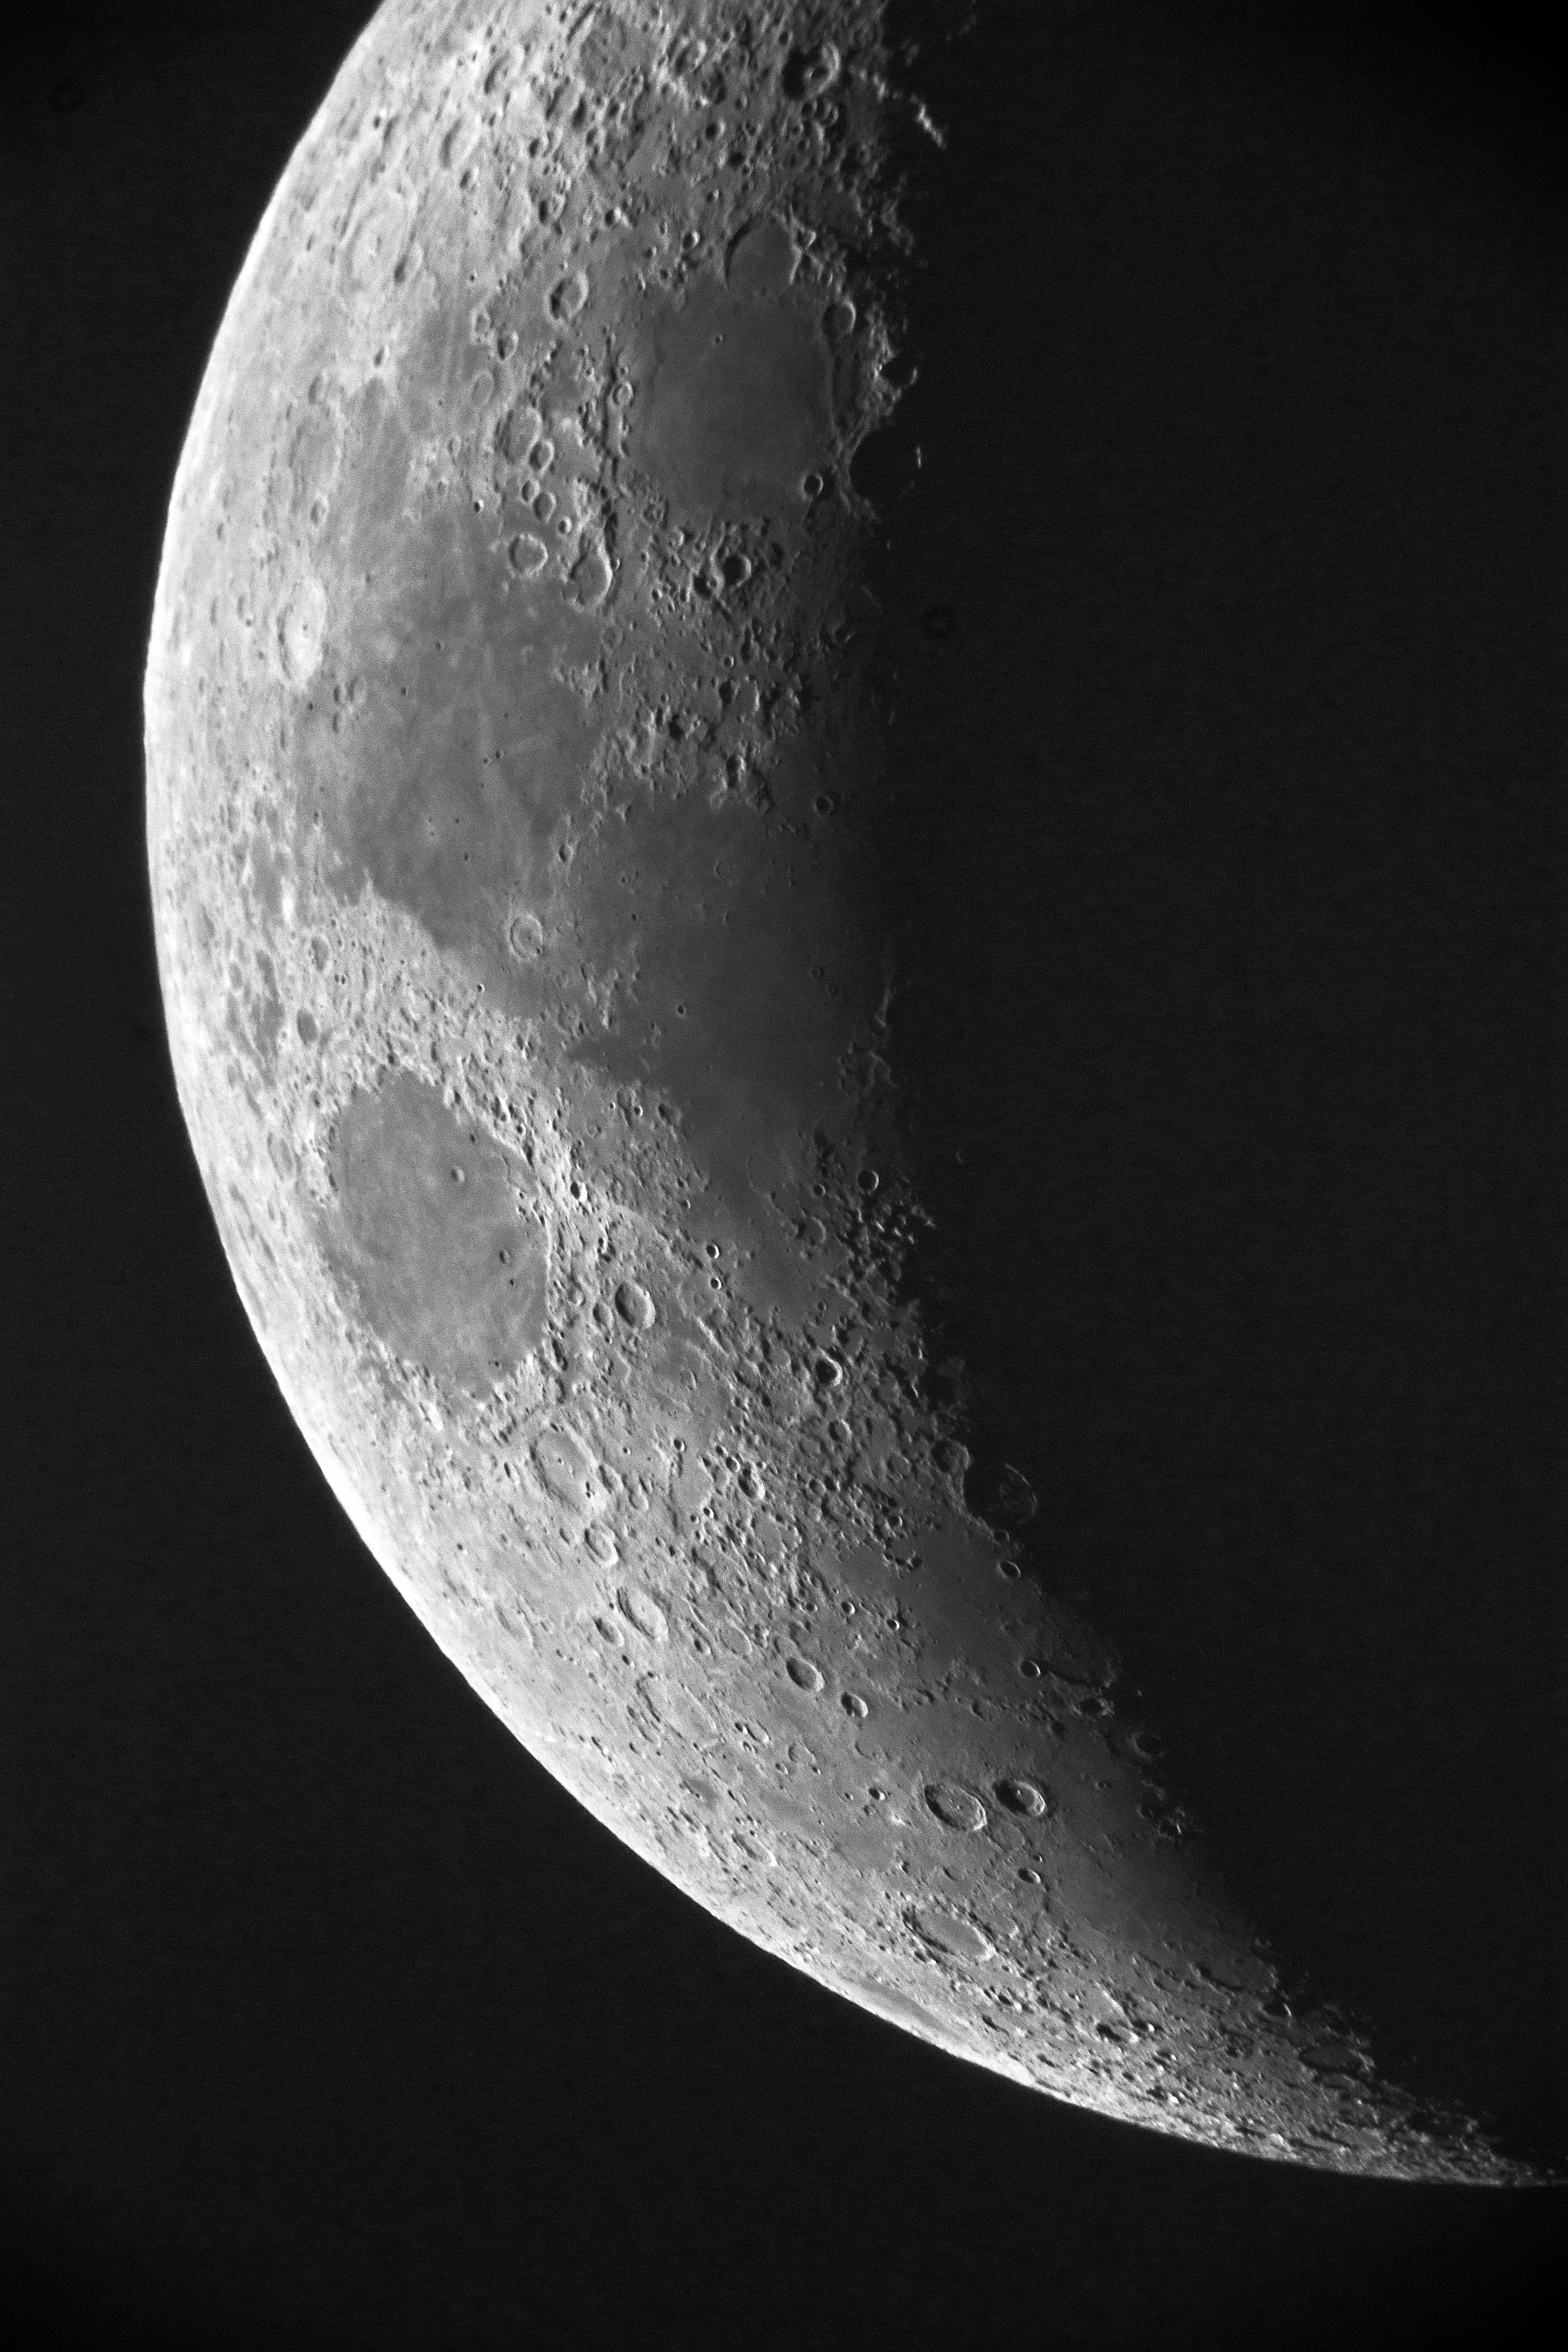 Second of three lunar images by Ken Kennedy